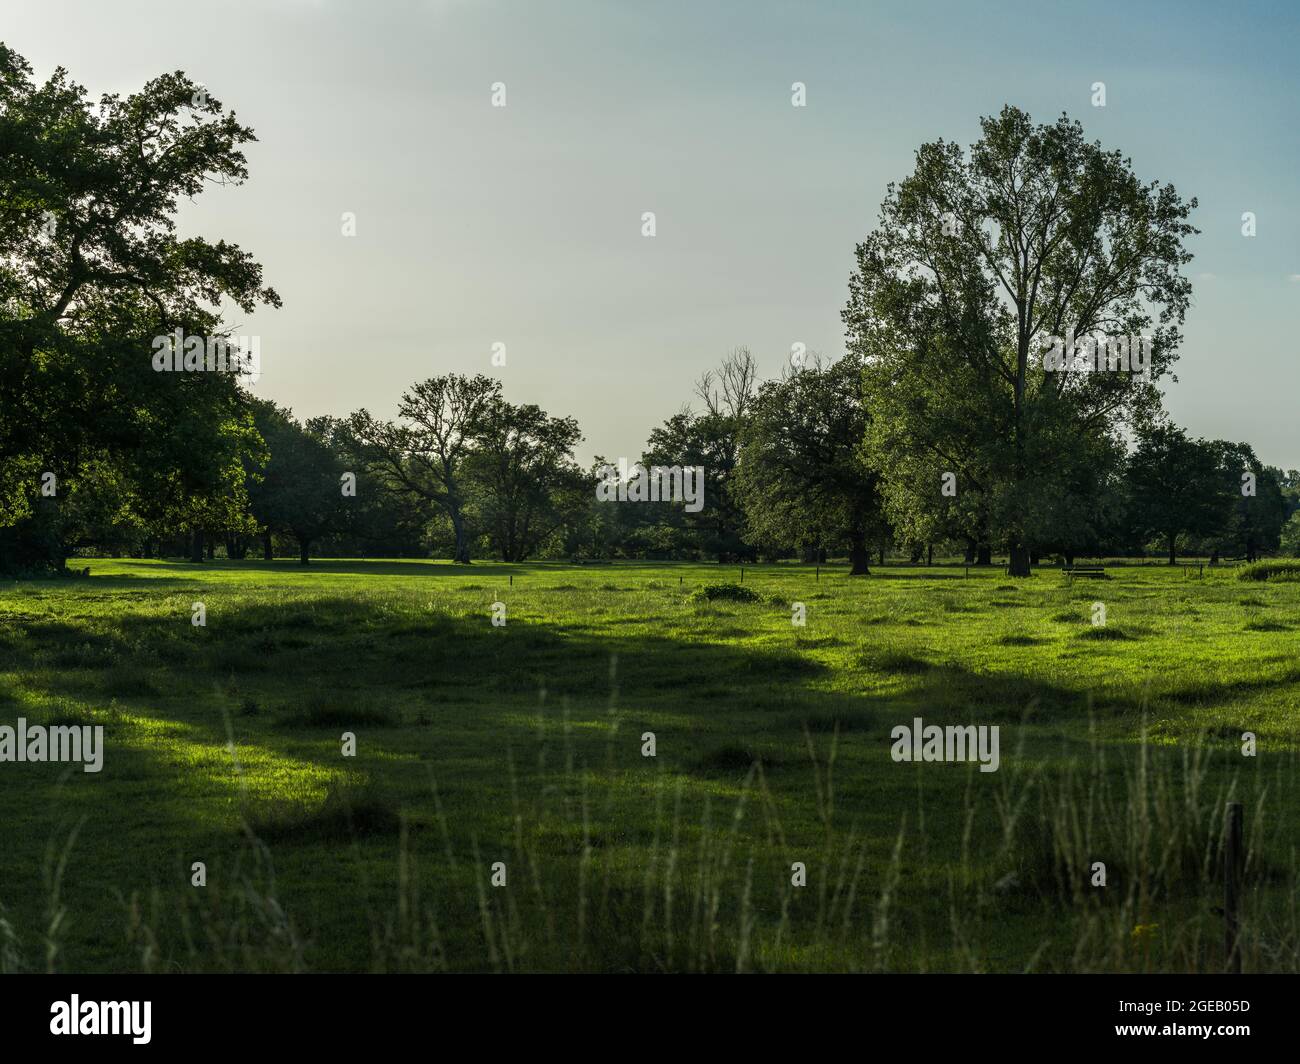 A meadow with trees and long evening shadows. Stock Photo